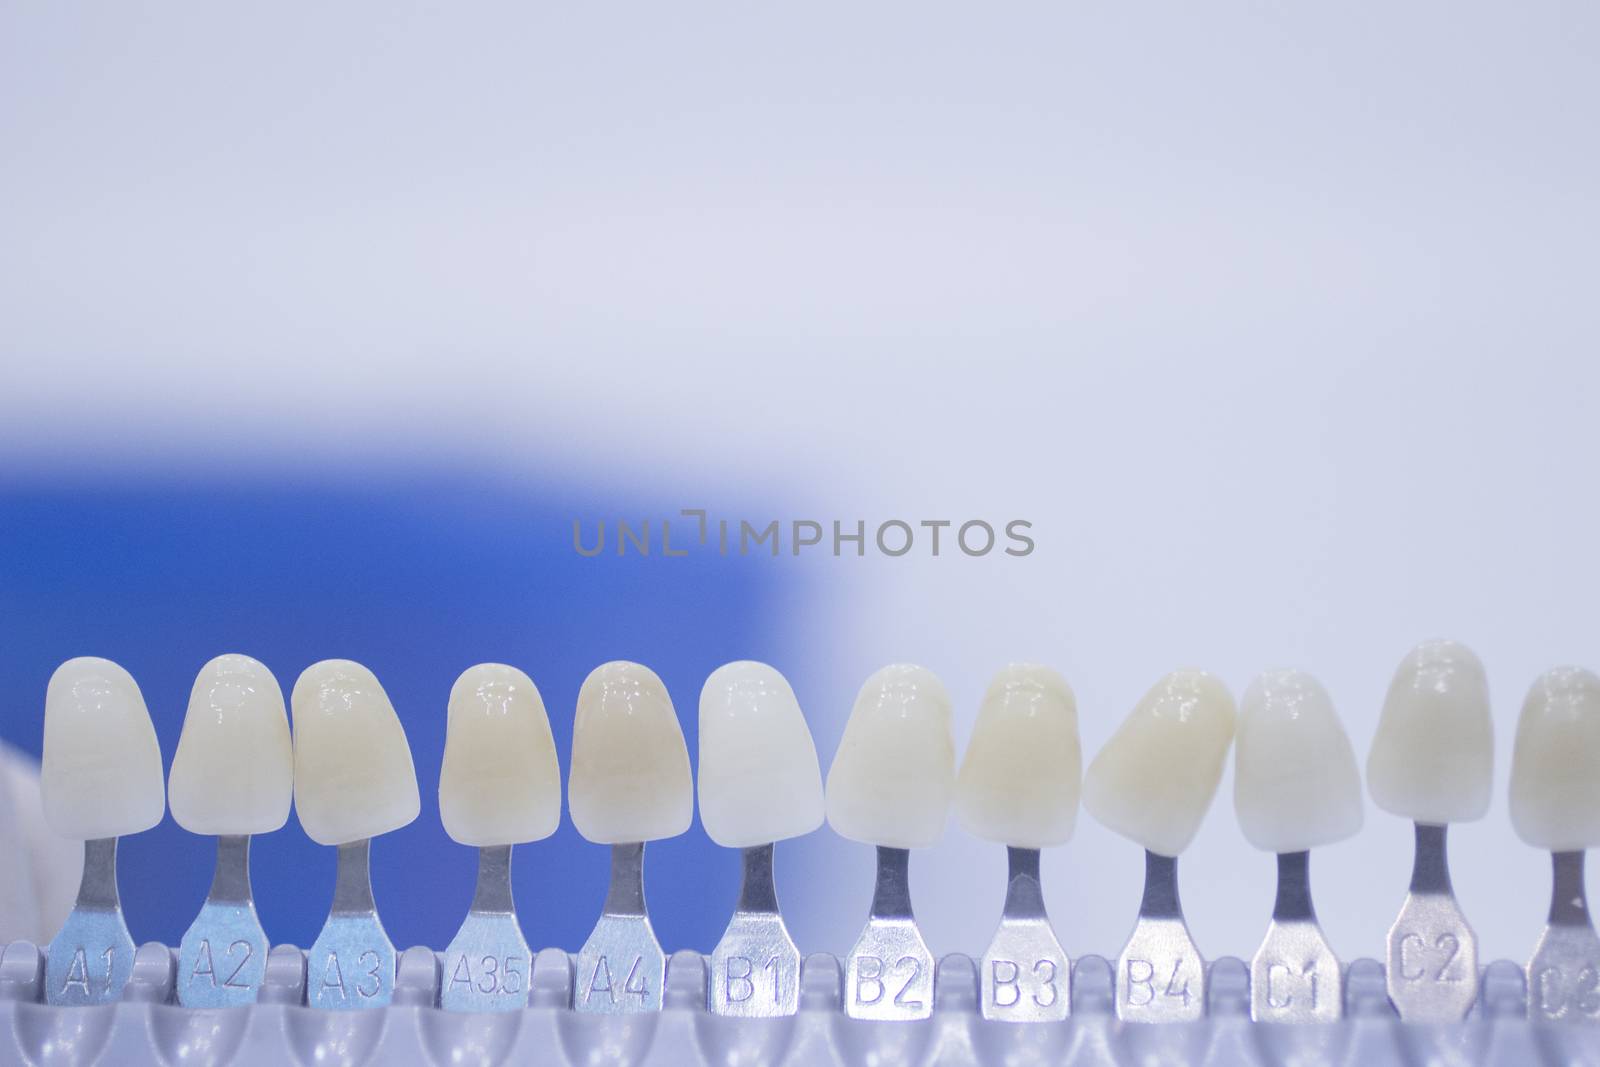 Dentist's tooth color guide used to choose the appropriate natural colors for a patient's tooth implants and crowns on plain white pastel light blue background of the dental surgery clinic table. Close-up macro photo. 